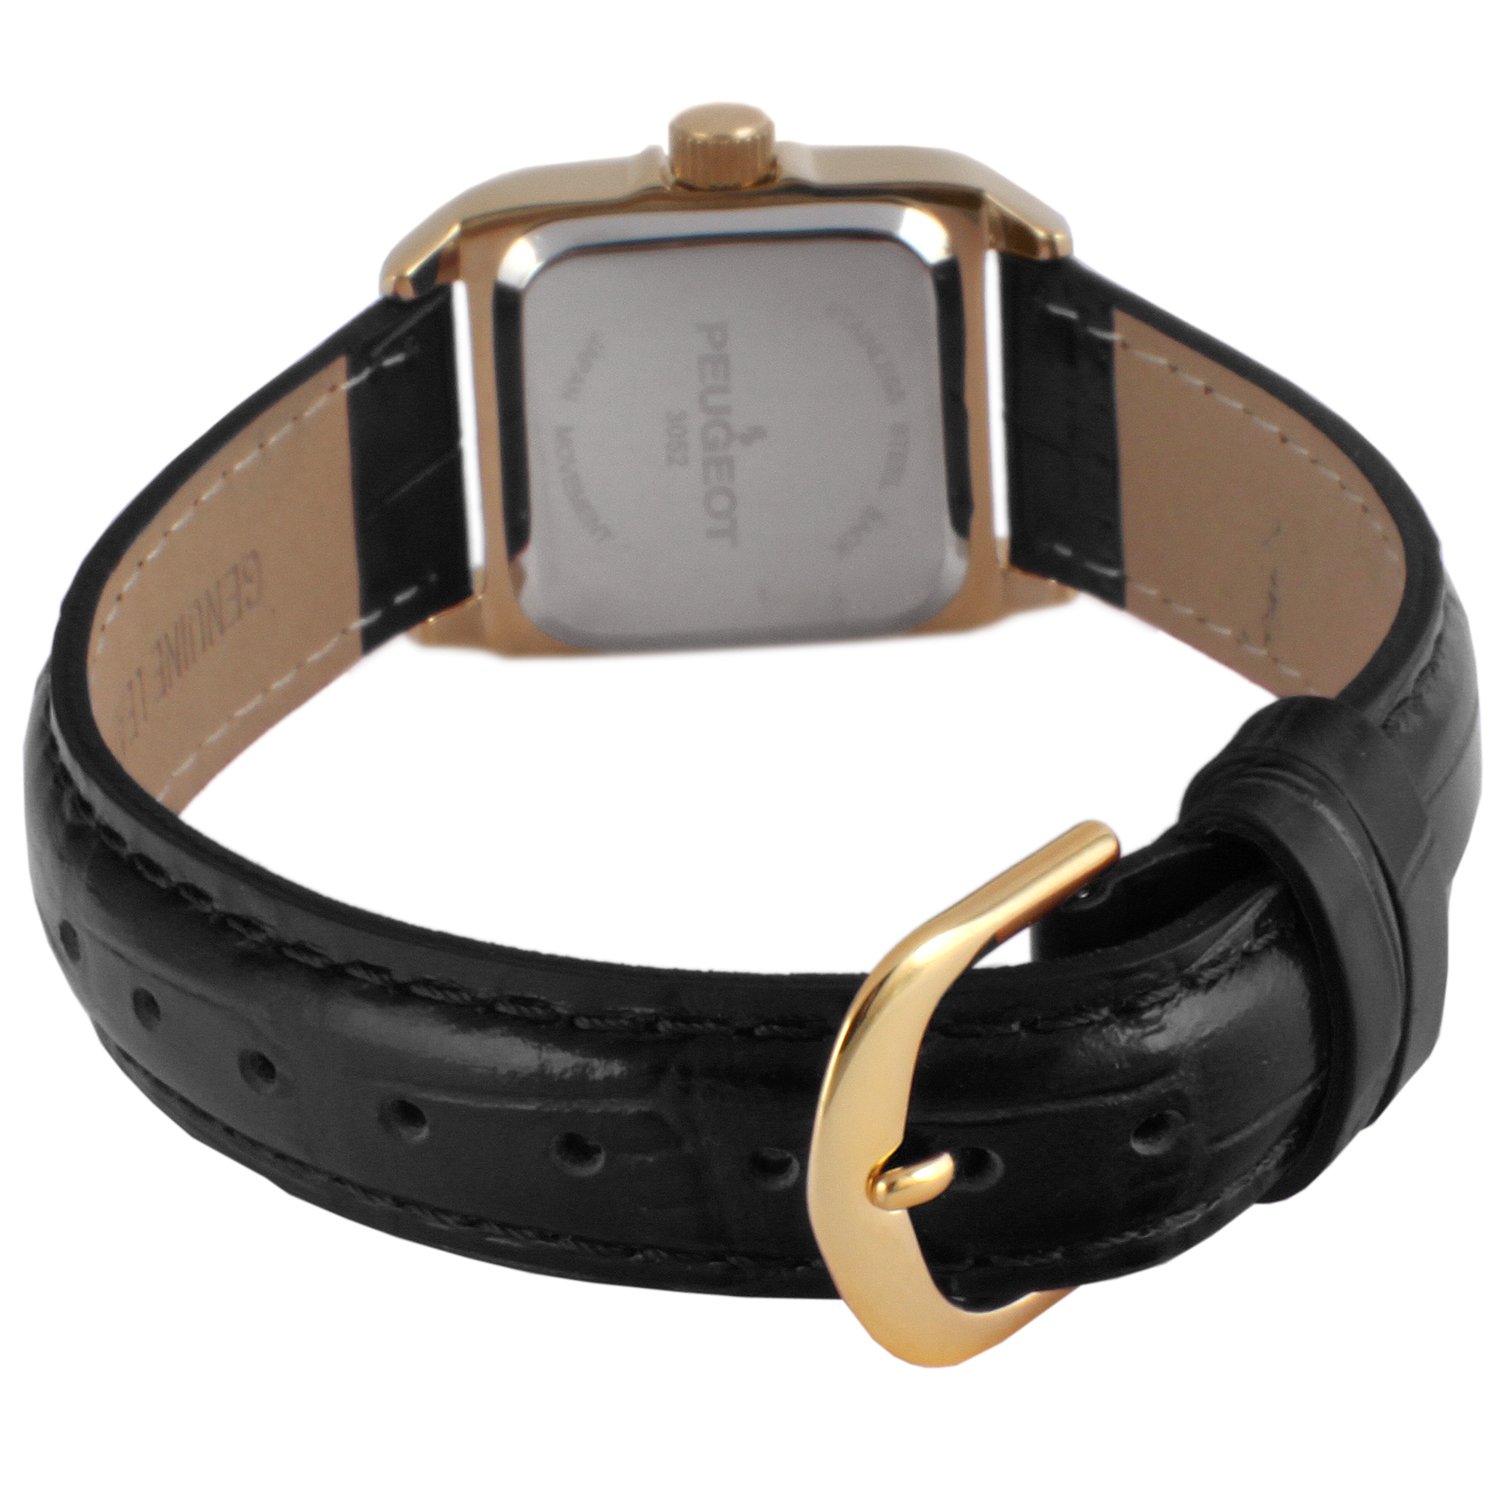 Peugeot Women's 14K Gold-Plated Tank Crystal Bezel Roman Numeral Black Leather Band Watch 3052BK